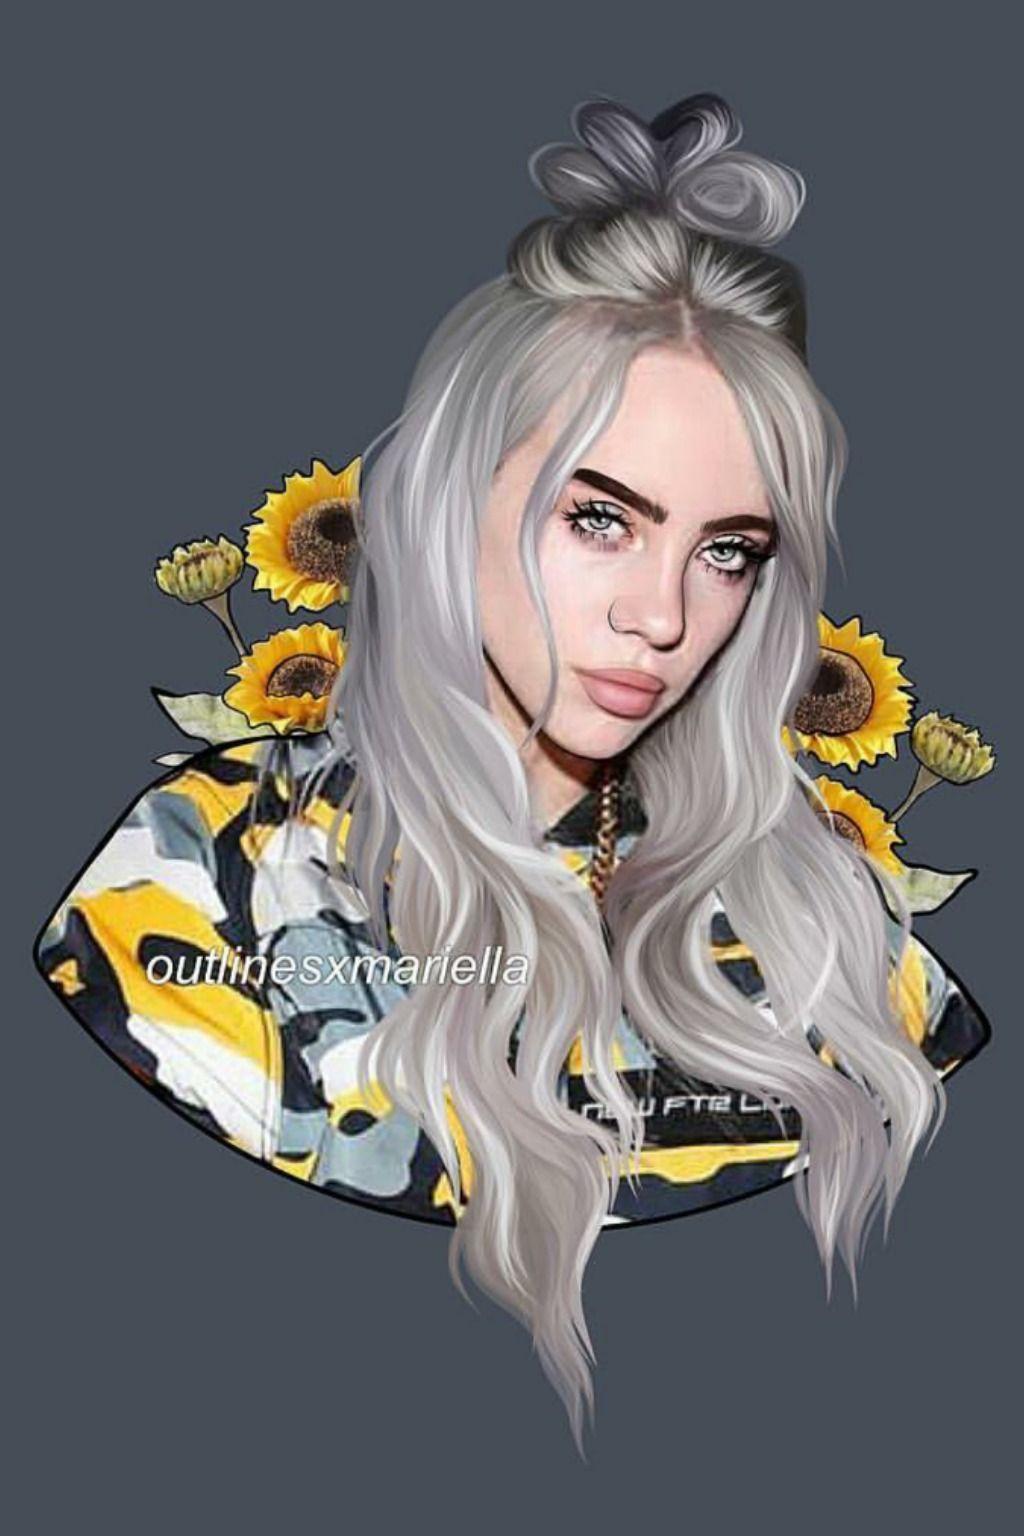 Ways To Use Stickers To Flood Your Socials With Billie Eilish